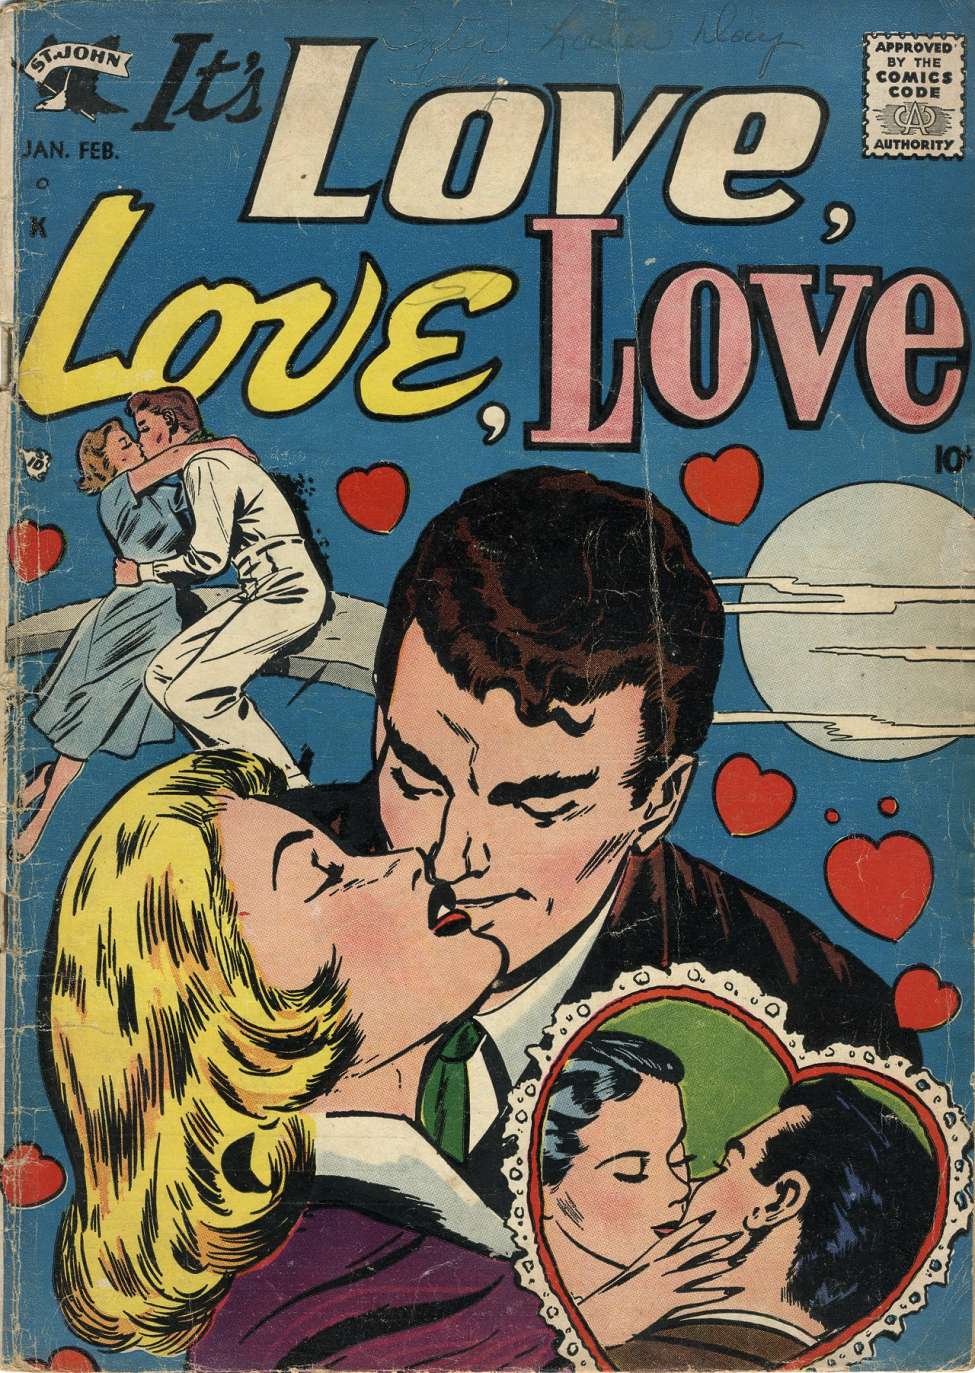 Book Cover For It's Love, Love, Love 2